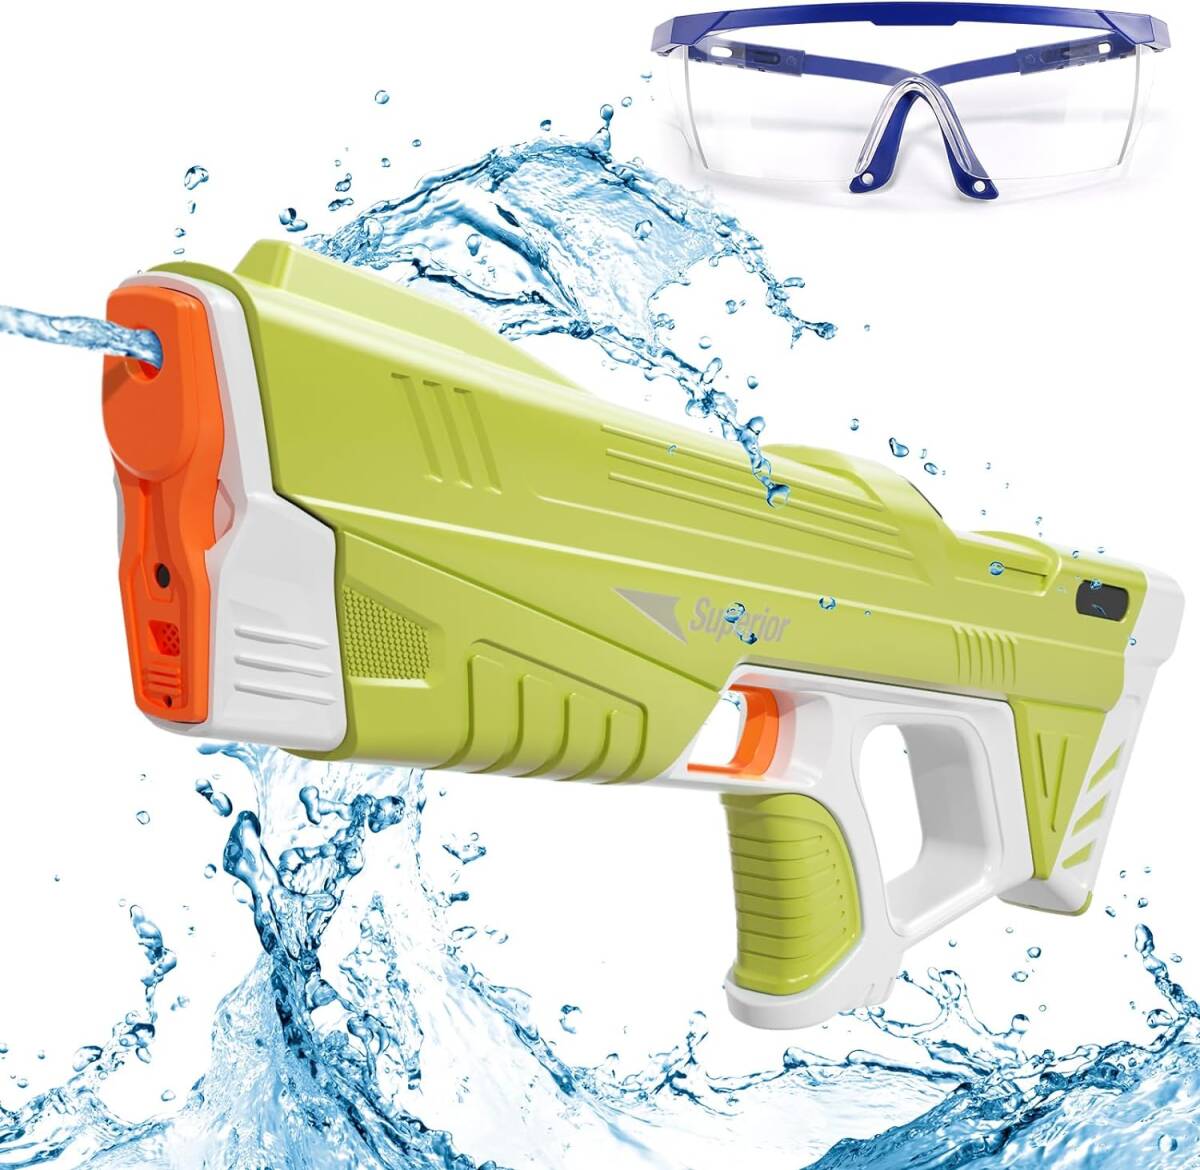  electromotive water gun yellow color electromotive water pistol super powerful . distance electric . water waterproof battery Pooh ruby chi sea water . summer festival camp place family child 